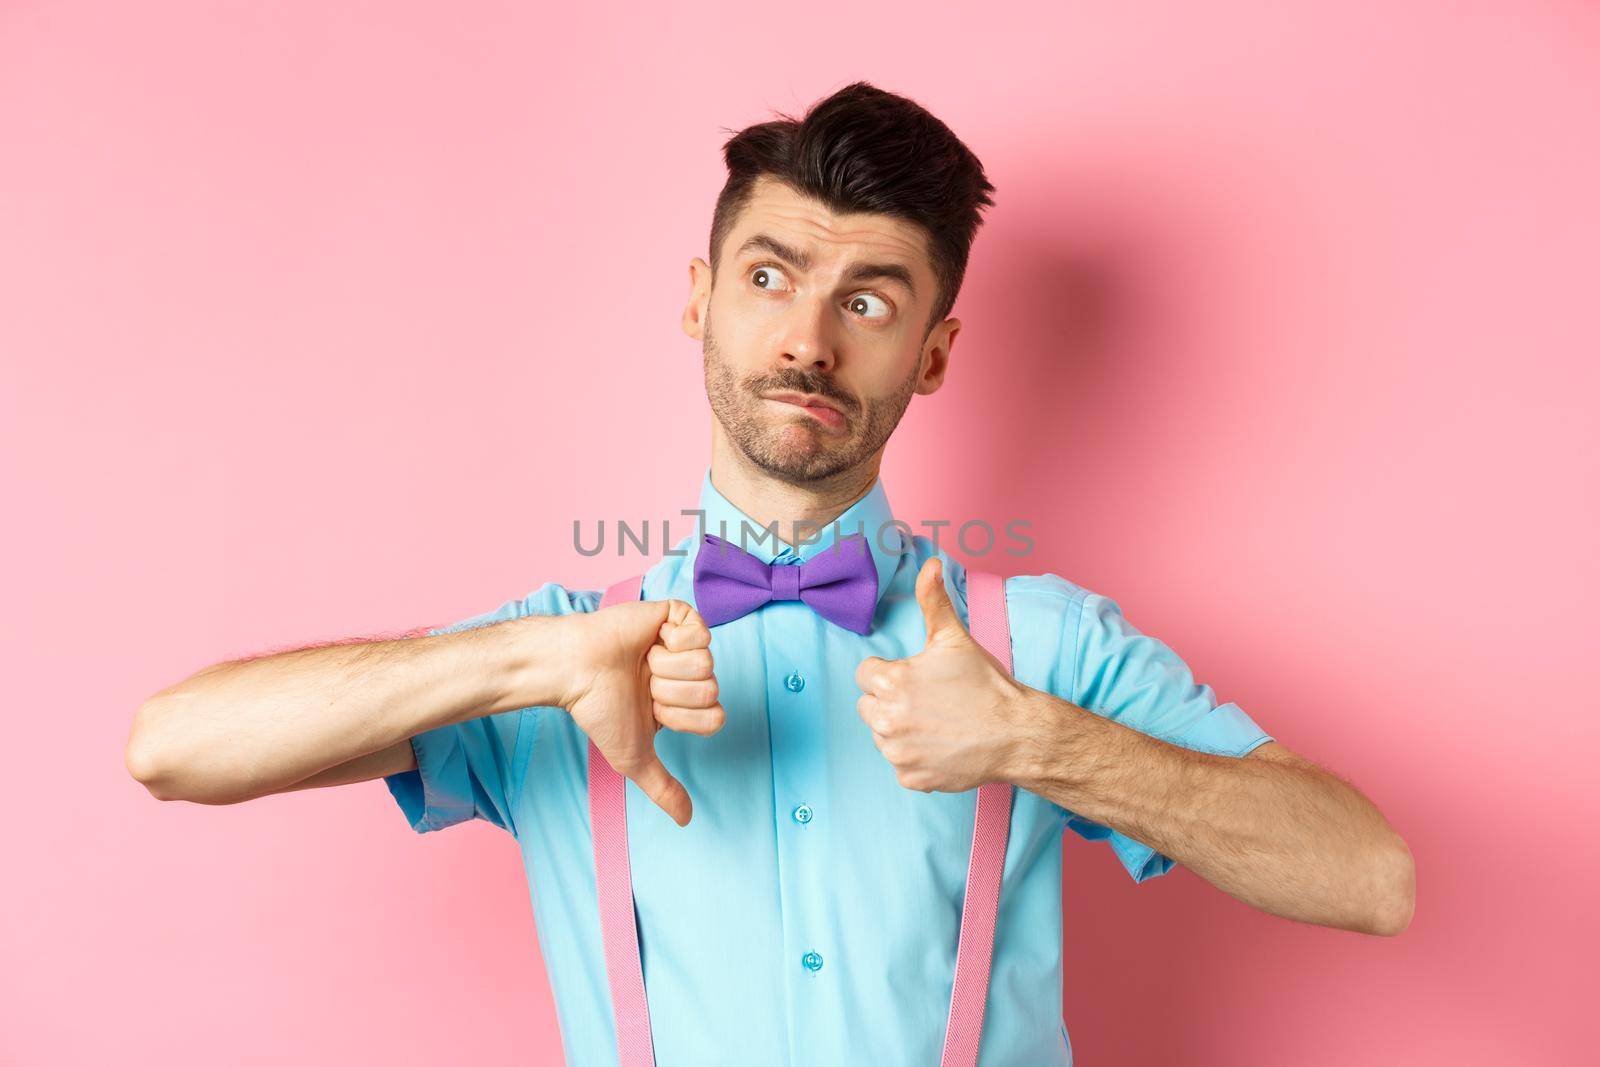 Confused guy looking pensive while judging, showing thumbs up and down, standing indecisive and unsure against pink background.